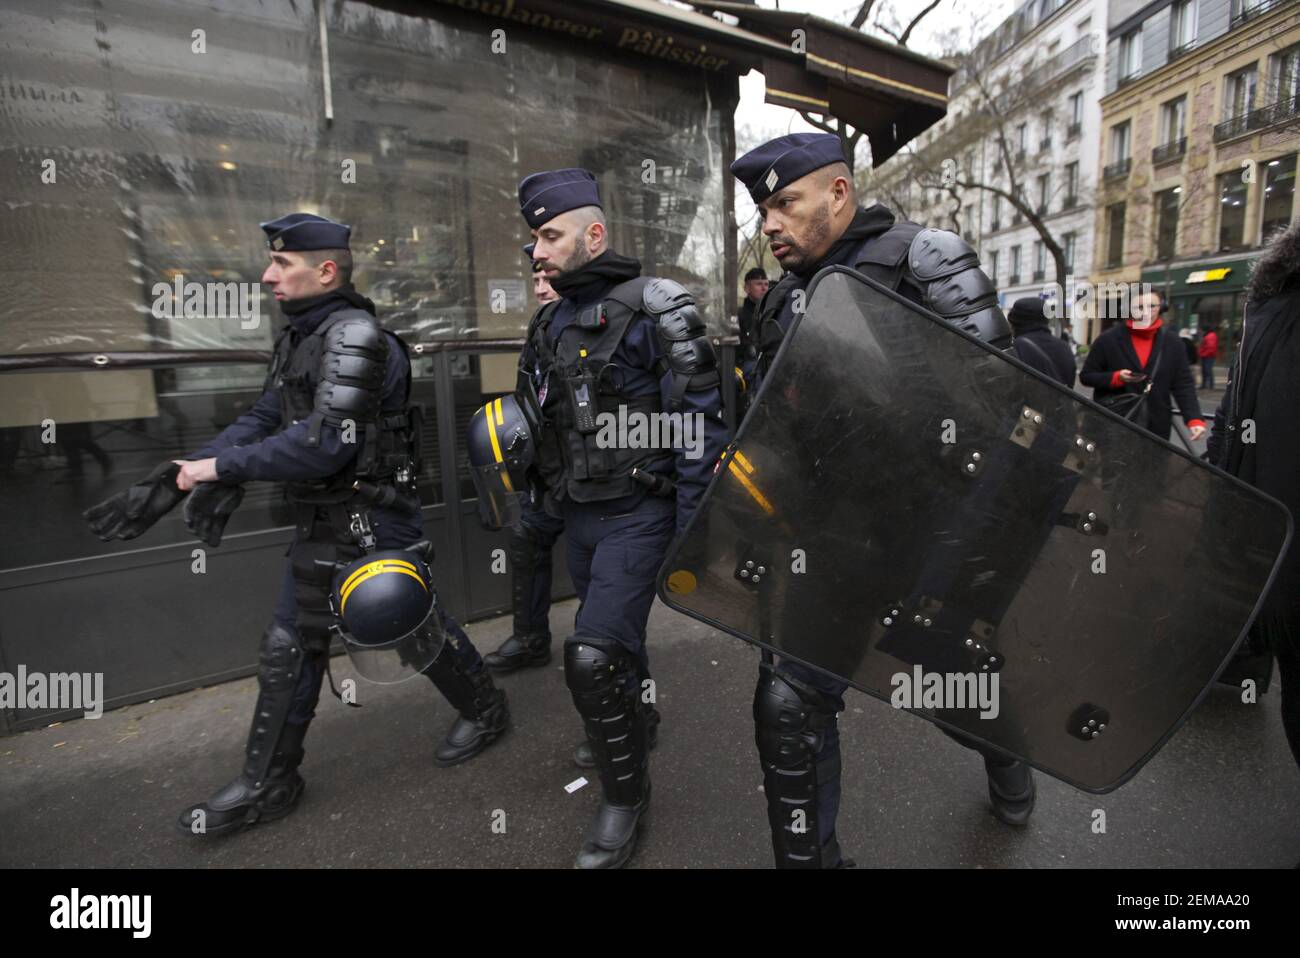 19 January 2019. Paris, France. Gilets Jaunes - Acte X take to the streets of Paris. CRS Riot police deploy along the route. An estimated 7,000 people took part in the looping 14 km route from Place des Invalides to protest tax hikes from the Government of Emmanuel Macron imposed on the people. An estimated 80,000 people took part in protests across the country. Regrettably the movement has attracted a violent element of agitators who often face off with riot police at the end of the marches which tends to deflect attention away from the message of the vast majority of peaceful protesters. (P Stock Photo